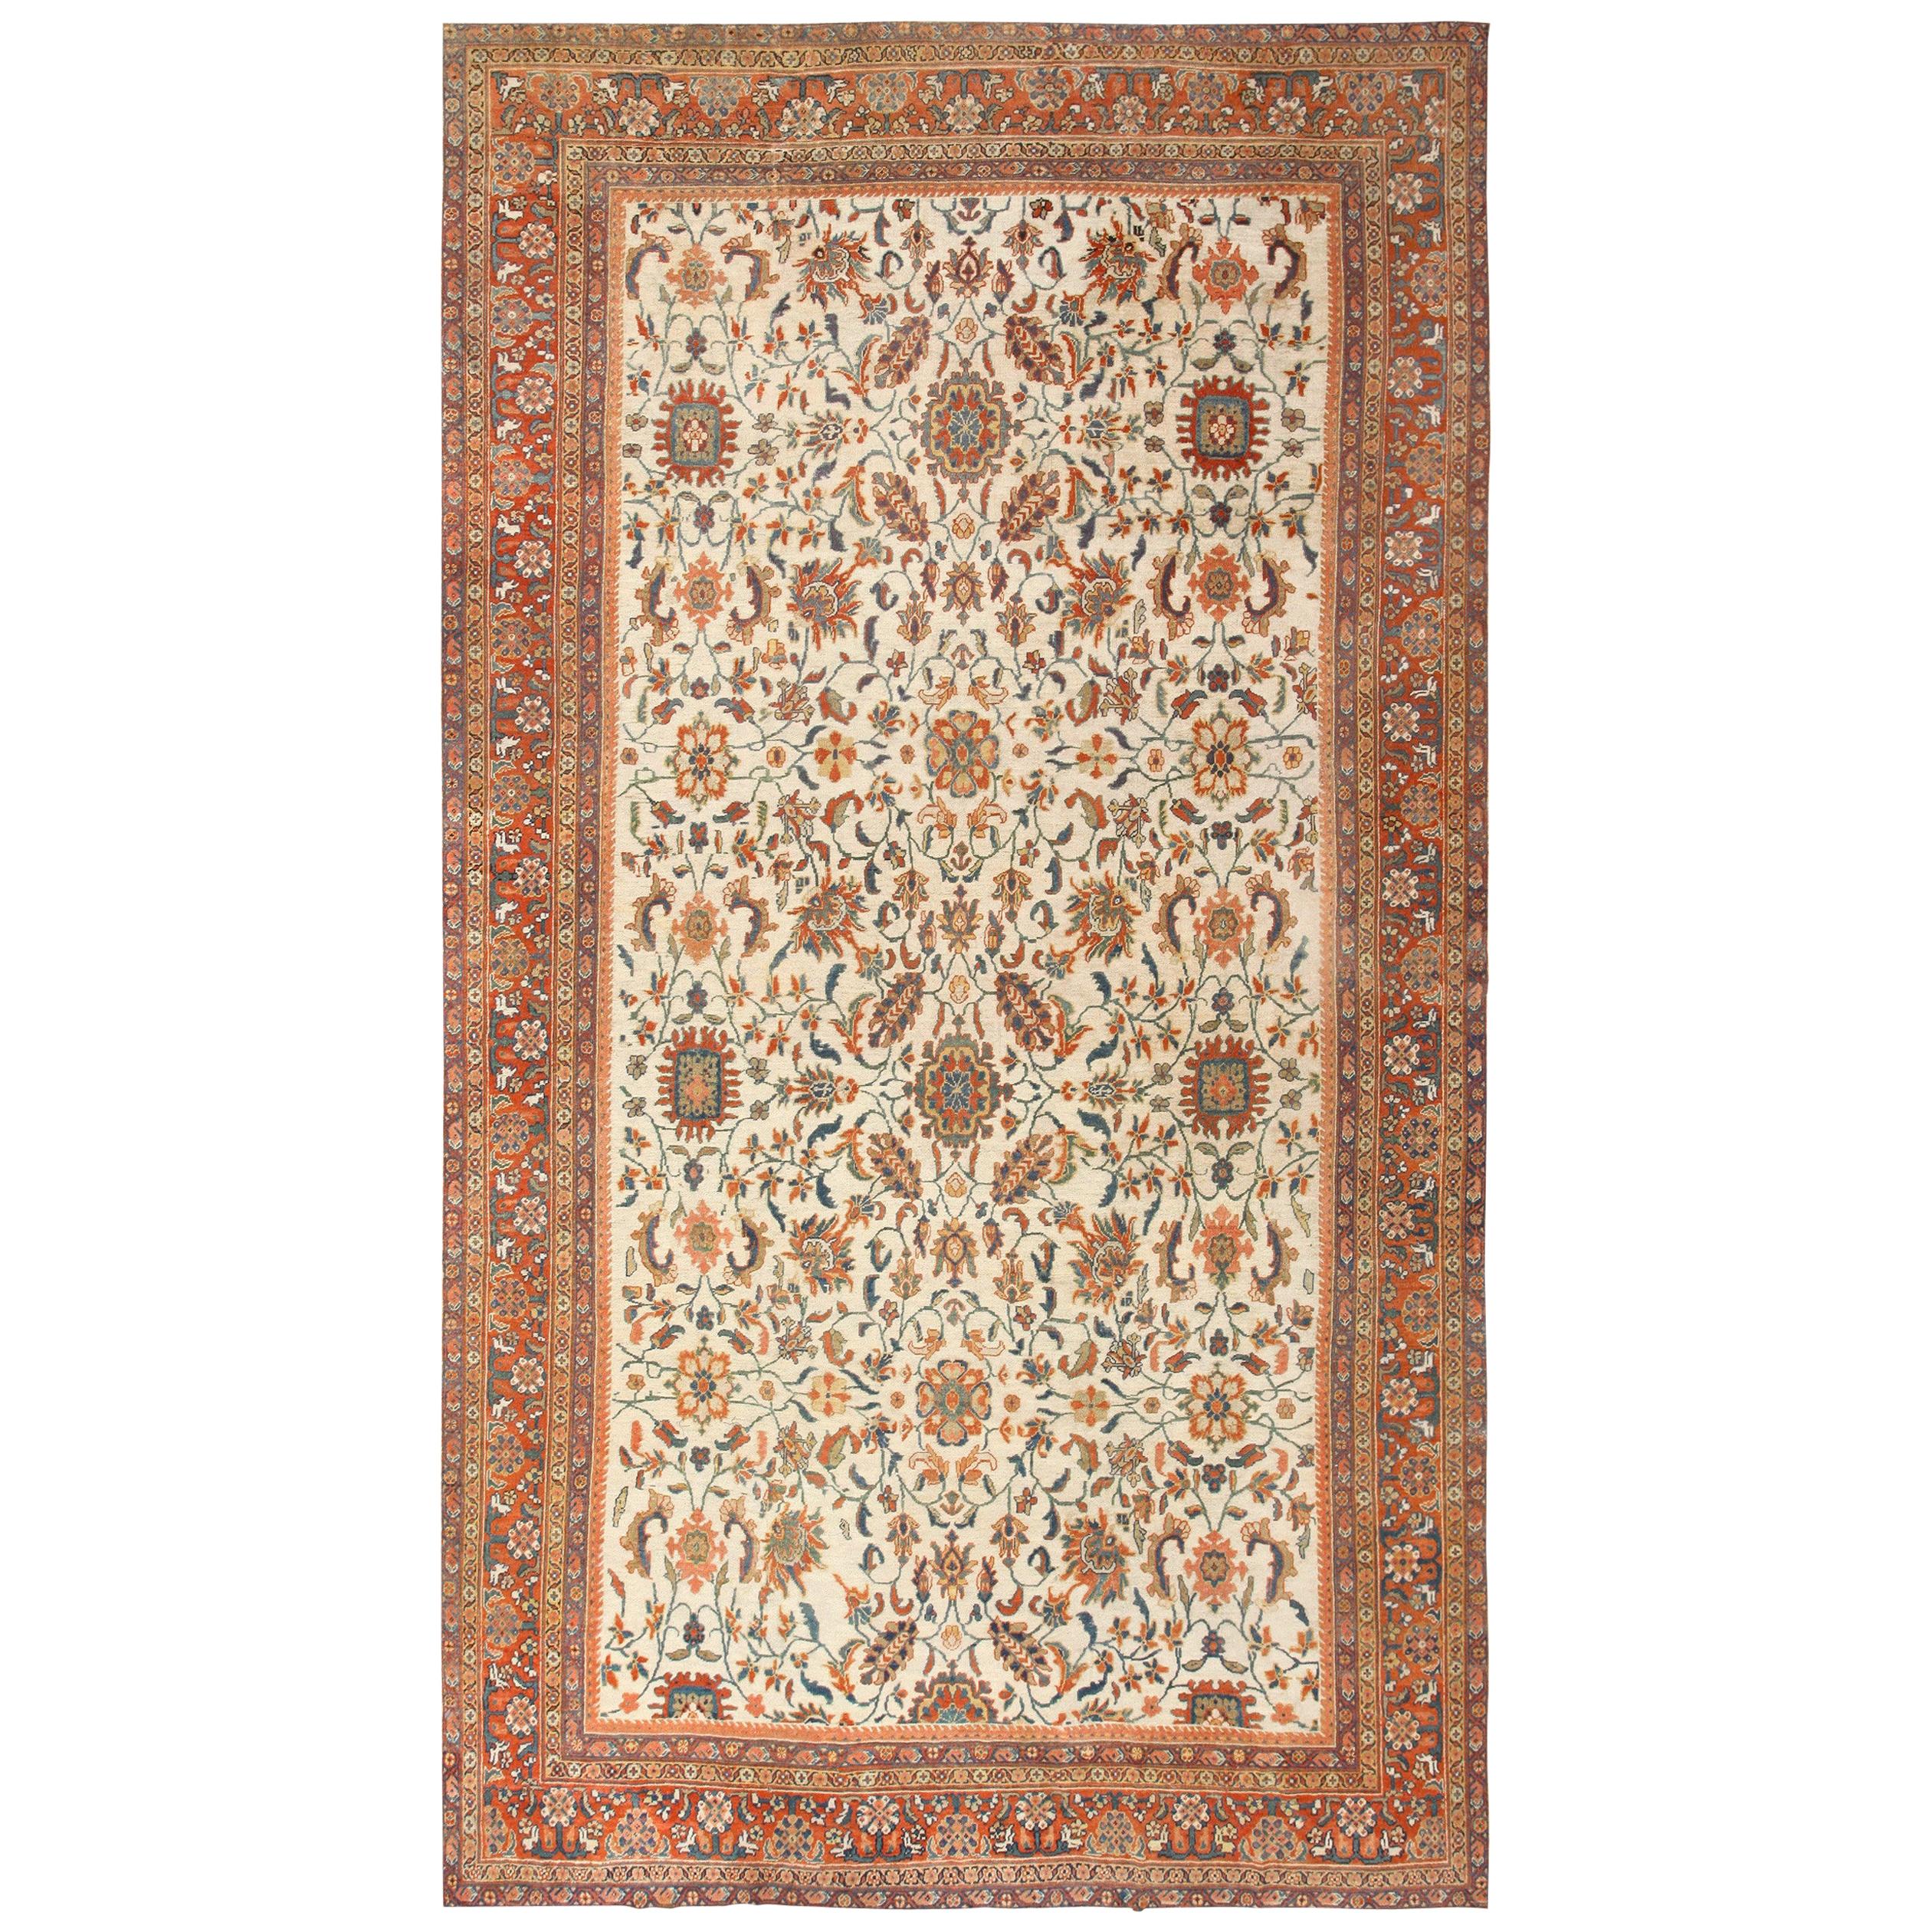 Antique Persian Sultanabad Rug. Size: 10 ft x 17 ft